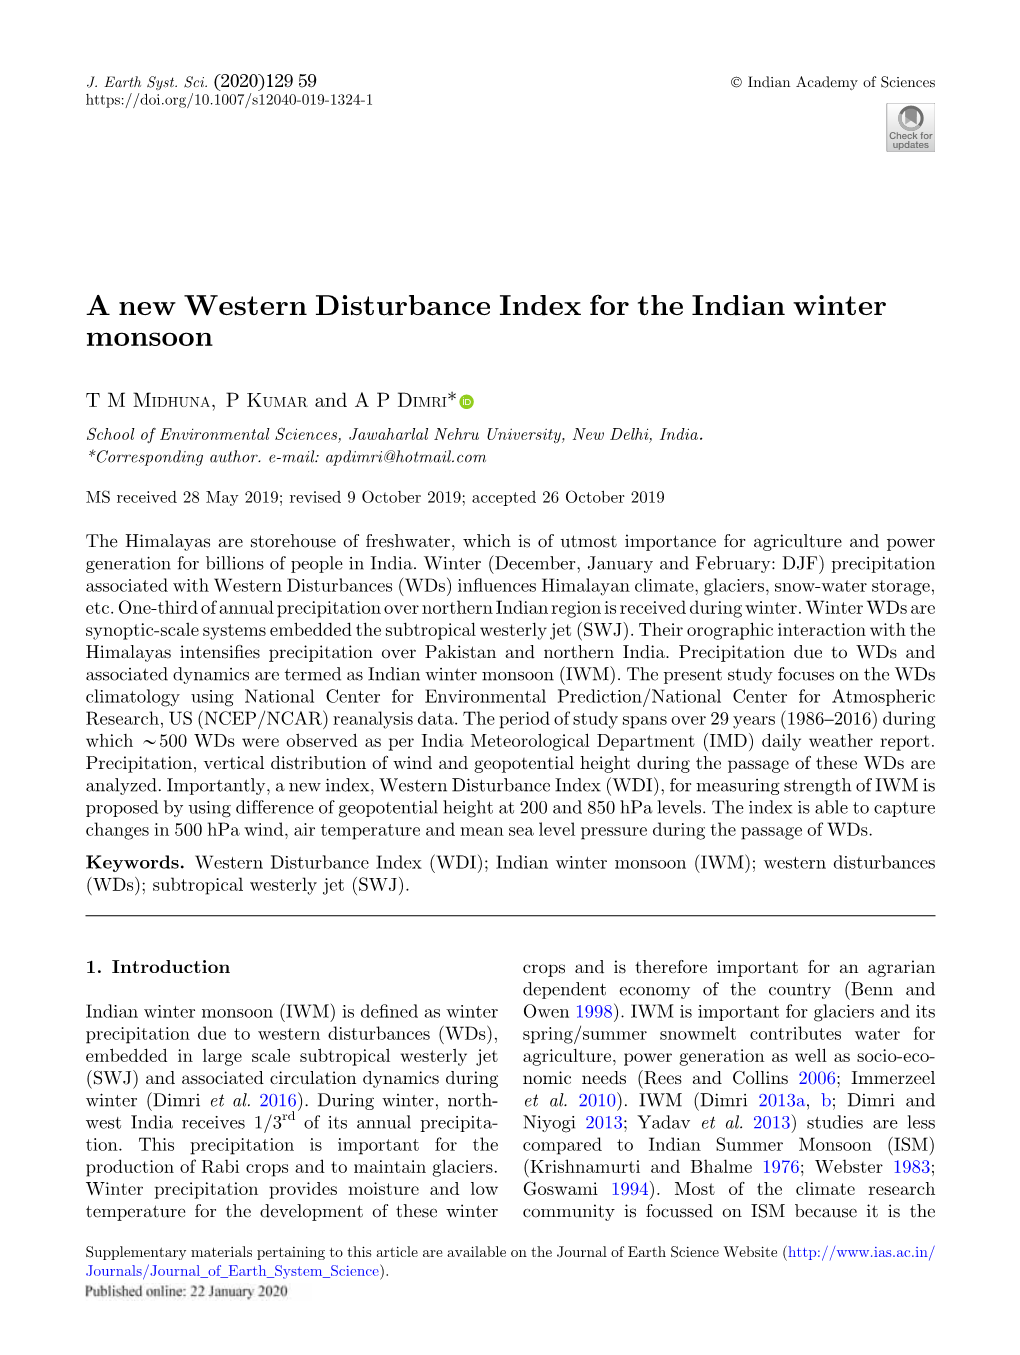 A New Western Disturbance Index for the Indian Winter Monsoon